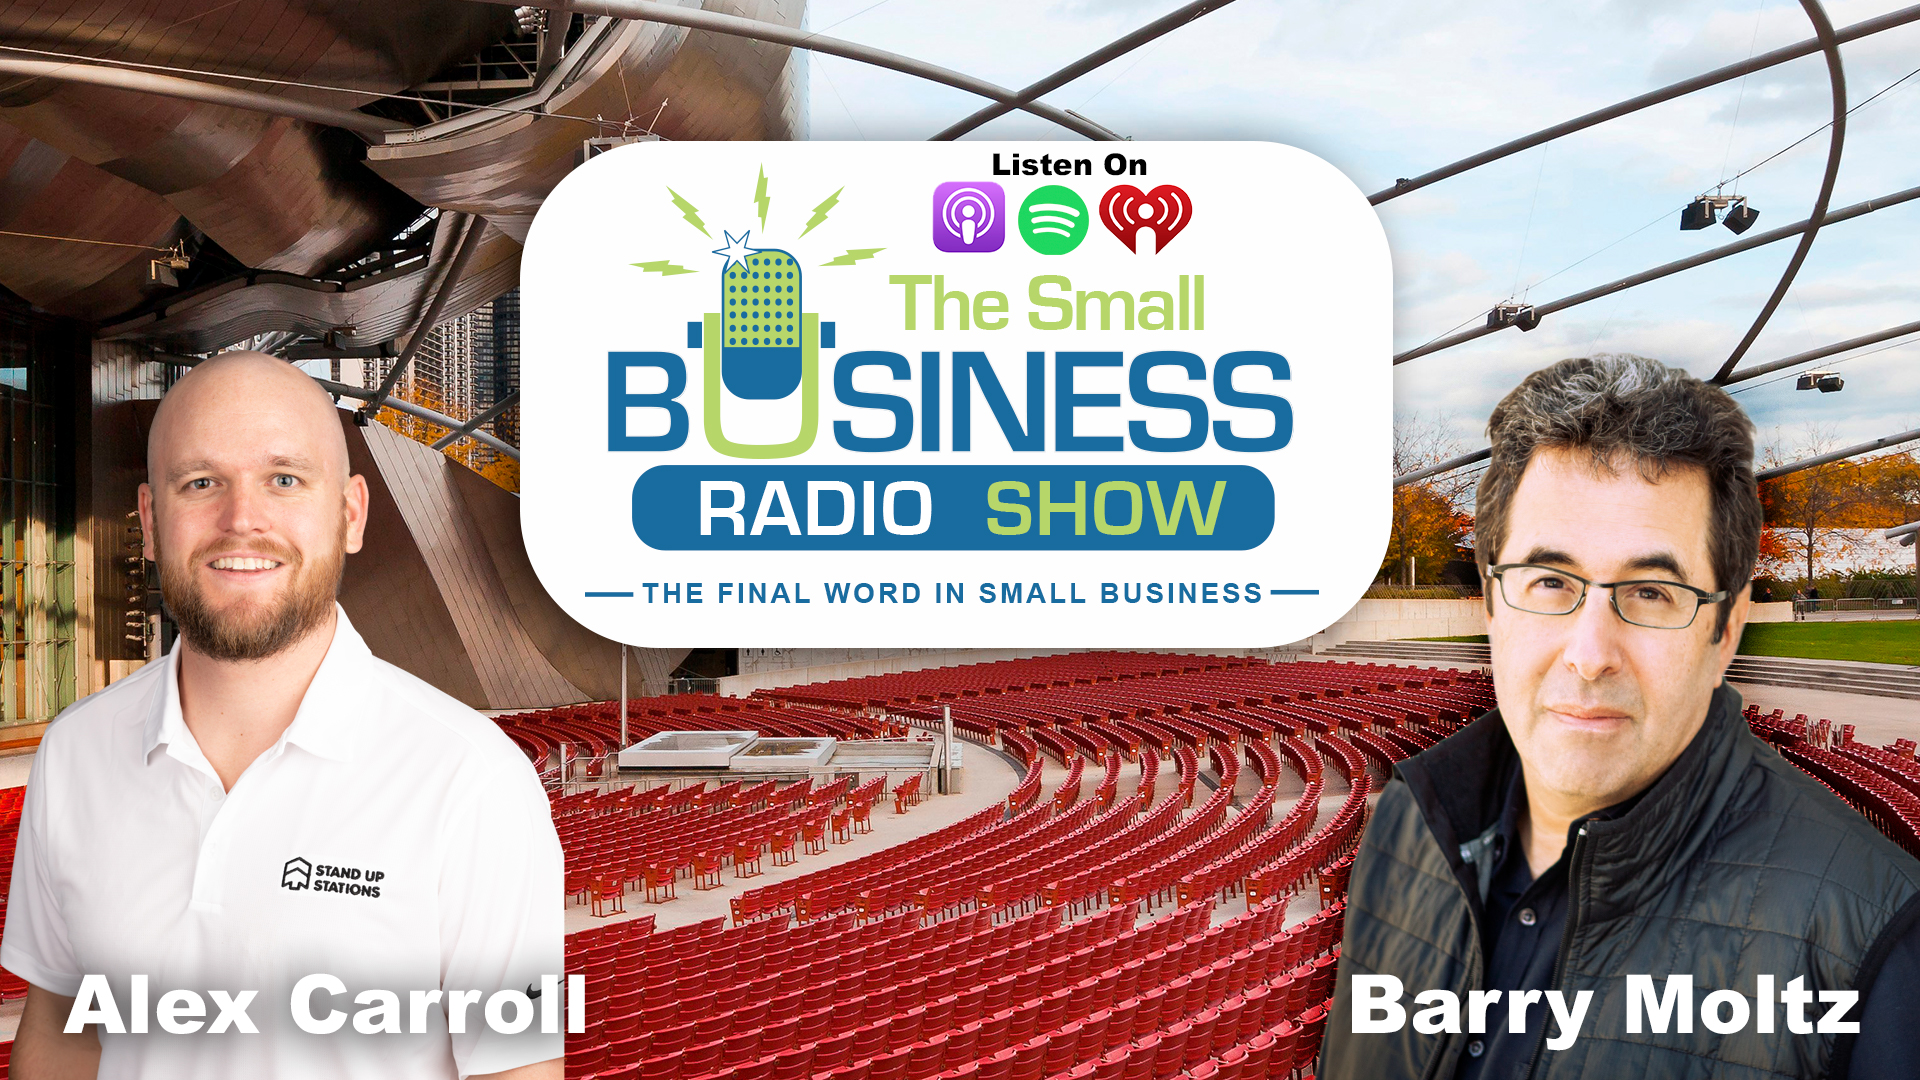 Alex Carroll on The Small Business Radio Show